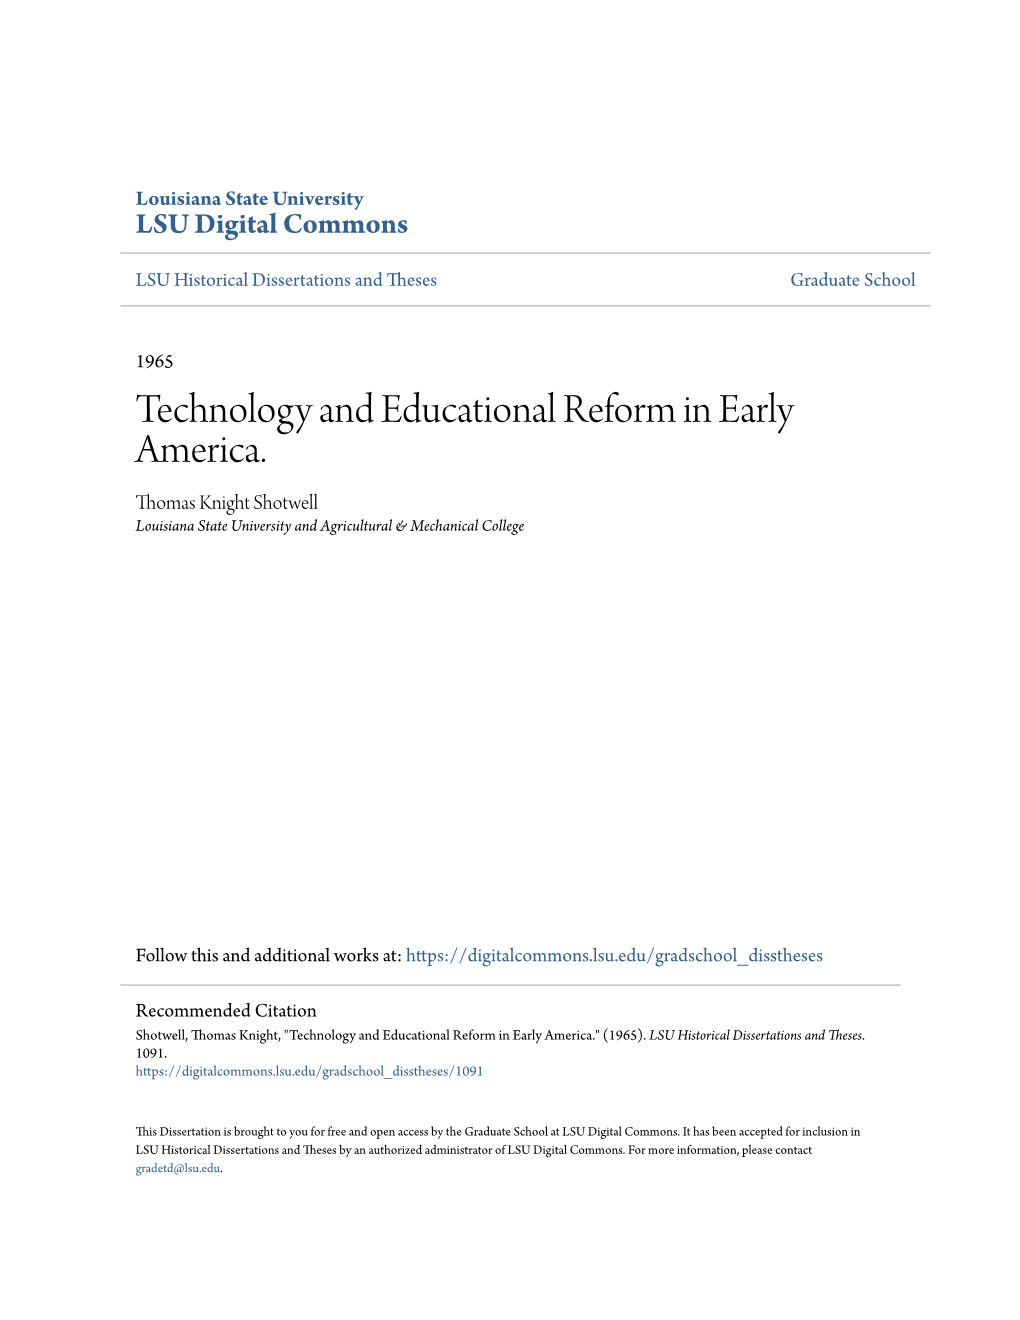 Technology and Educational Reform in Early America. Thomas Knight Shotwell Louisiana State University and Agricultural & Mechanical College